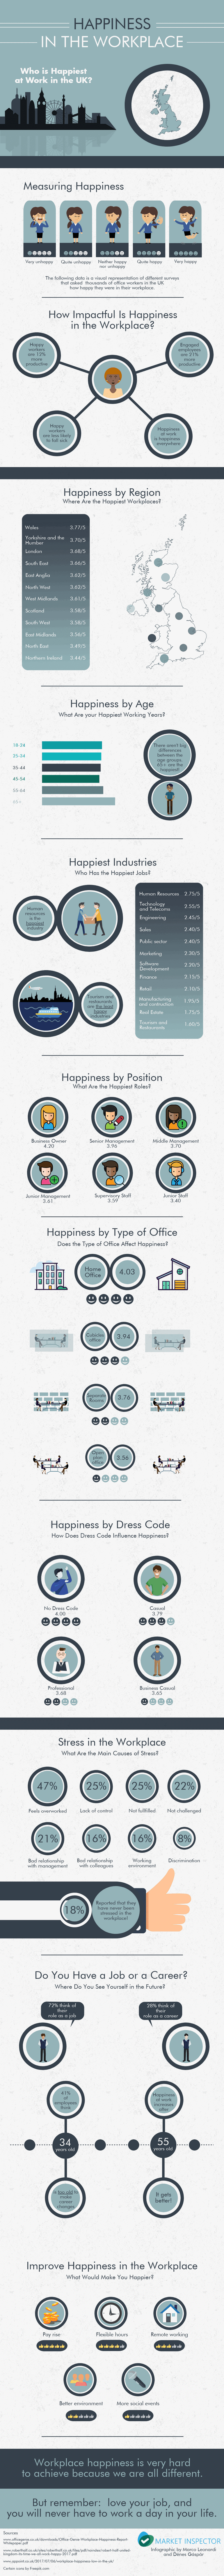 Happiness in the Workplace